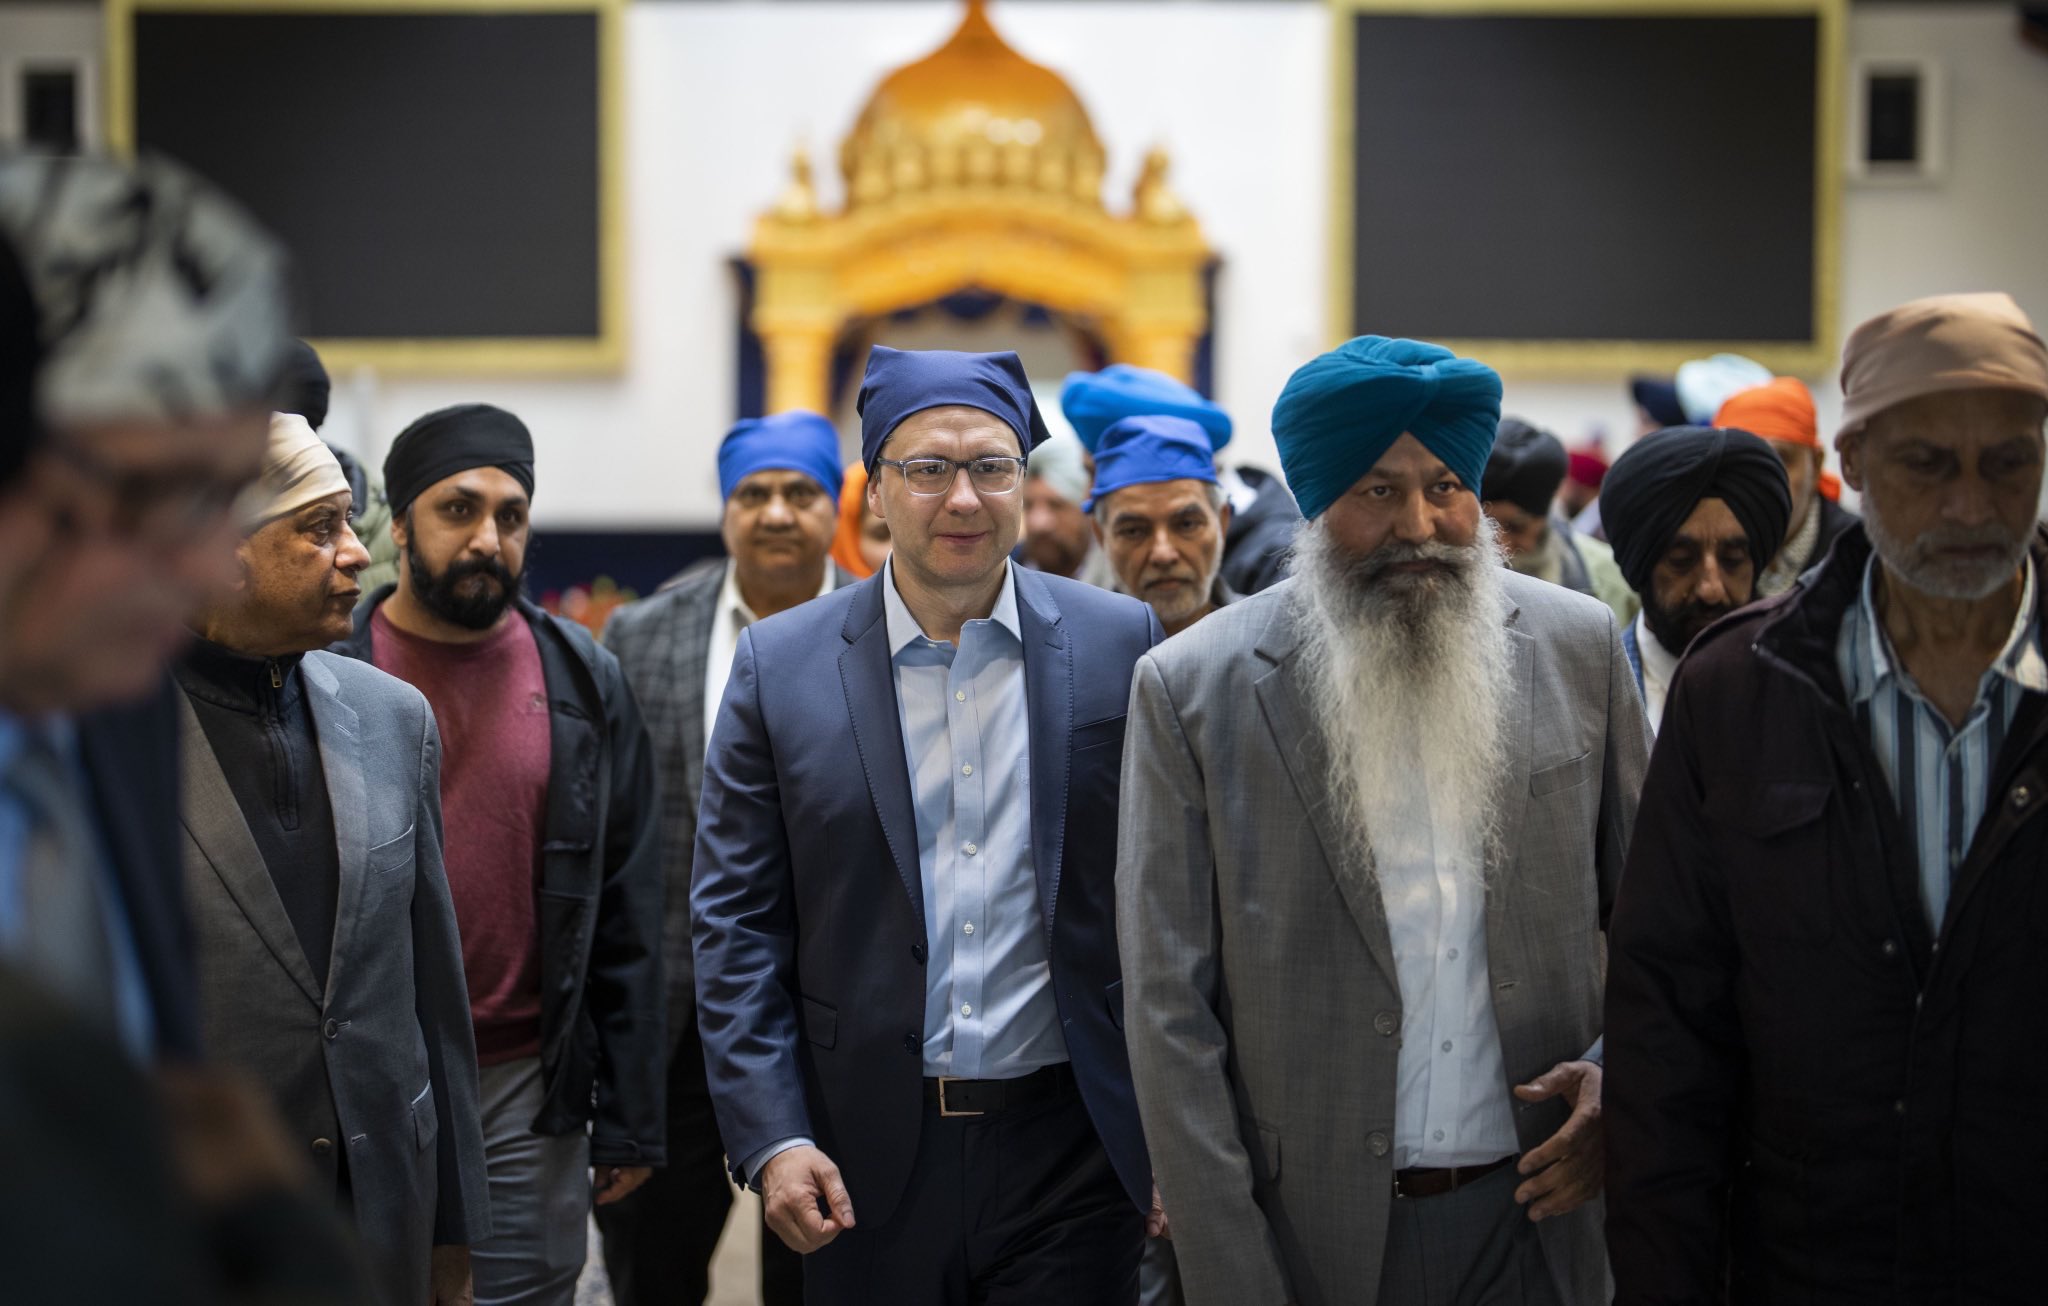 Pierre Poilievre on X: "The Khalsa Diwan Society Gurdwara has served as a  place for prayer and community for Sikh people in Vancouver. Thank you to  the Sikh community here for your